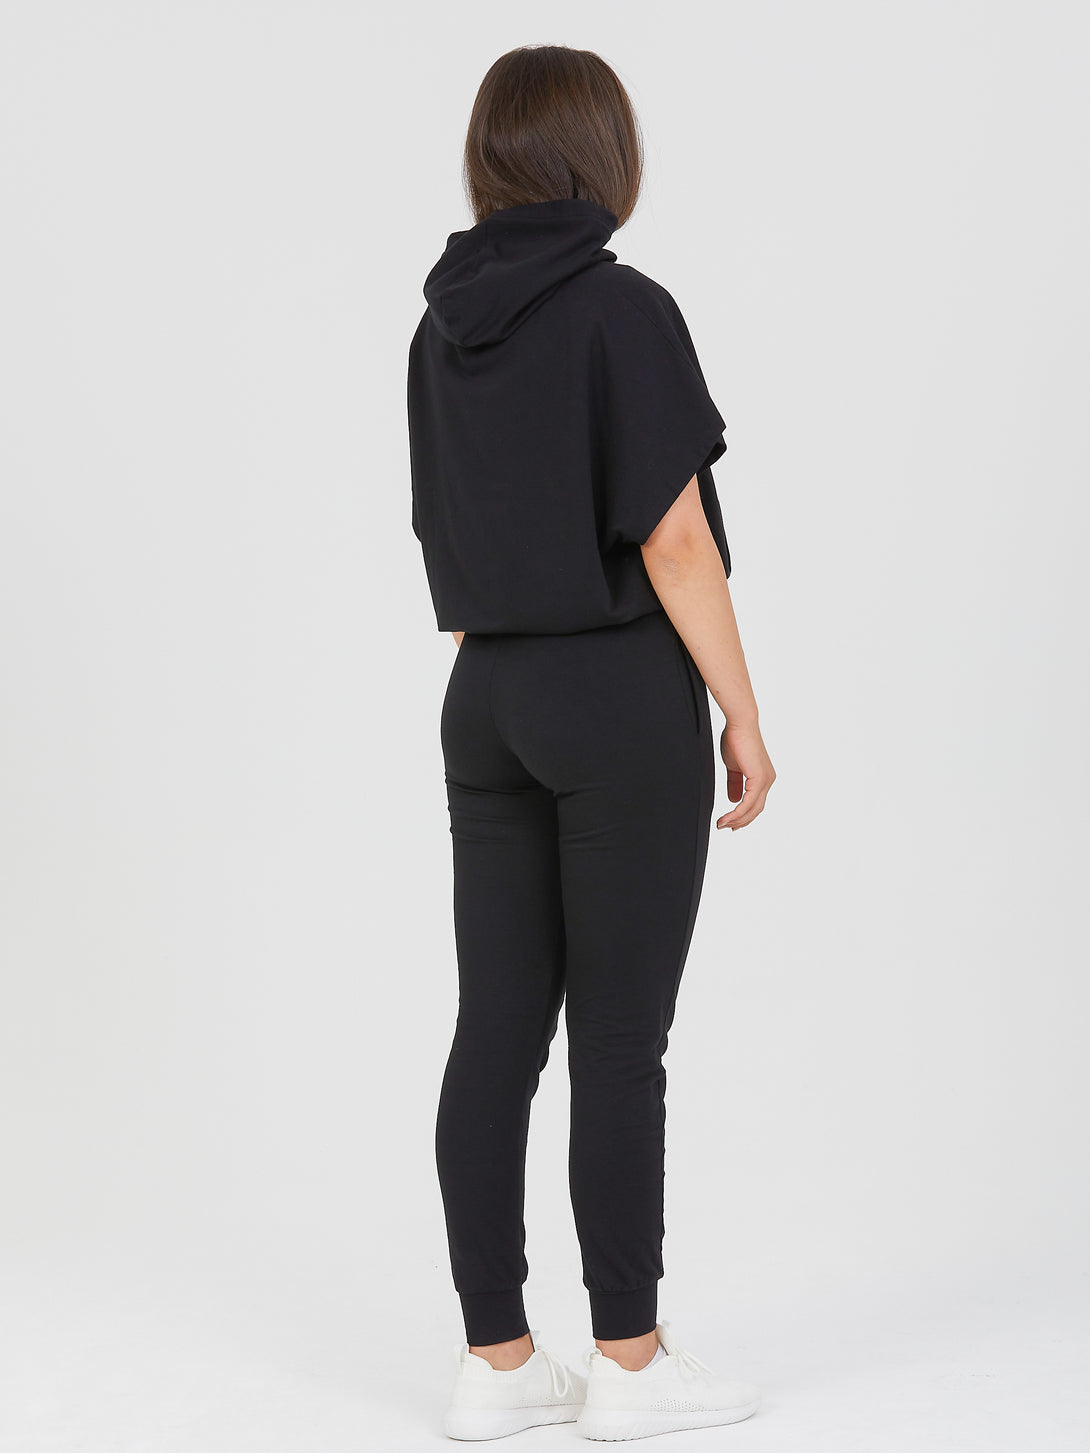 A Woman Wearing BlackColor All-Day Essential Sweatshirt